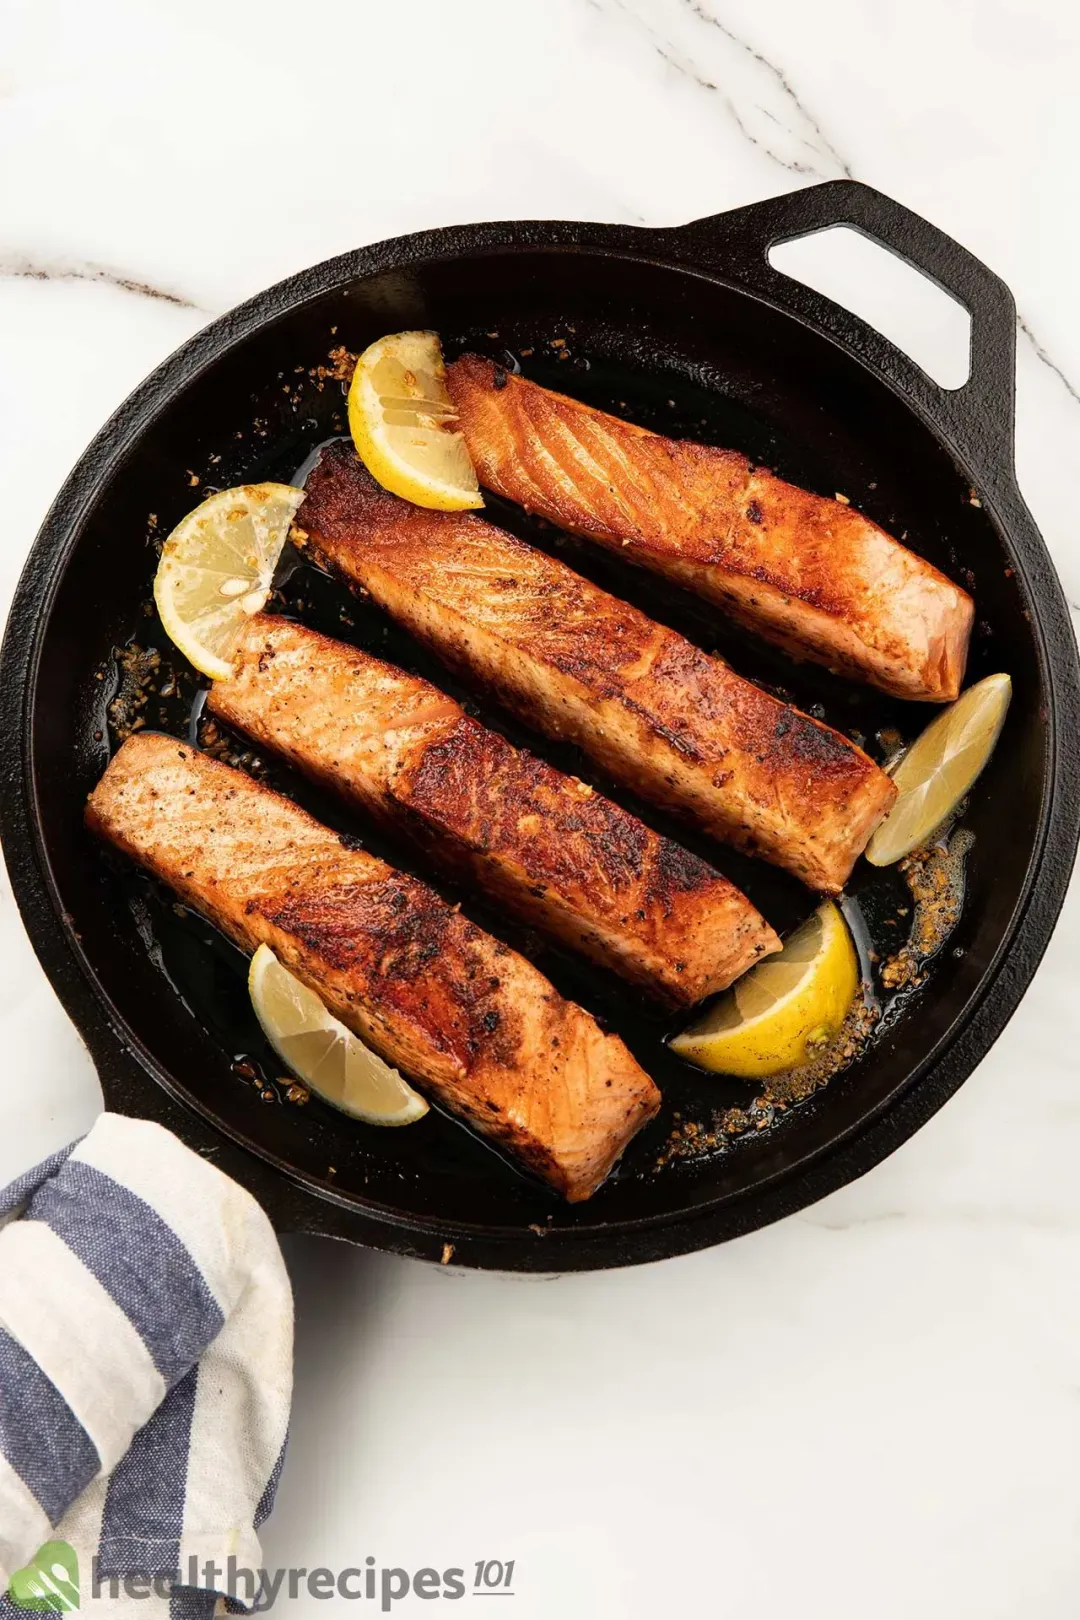 Four pan-seared salmon fillets with brown edges laid on a skillet with a few slices of lemon